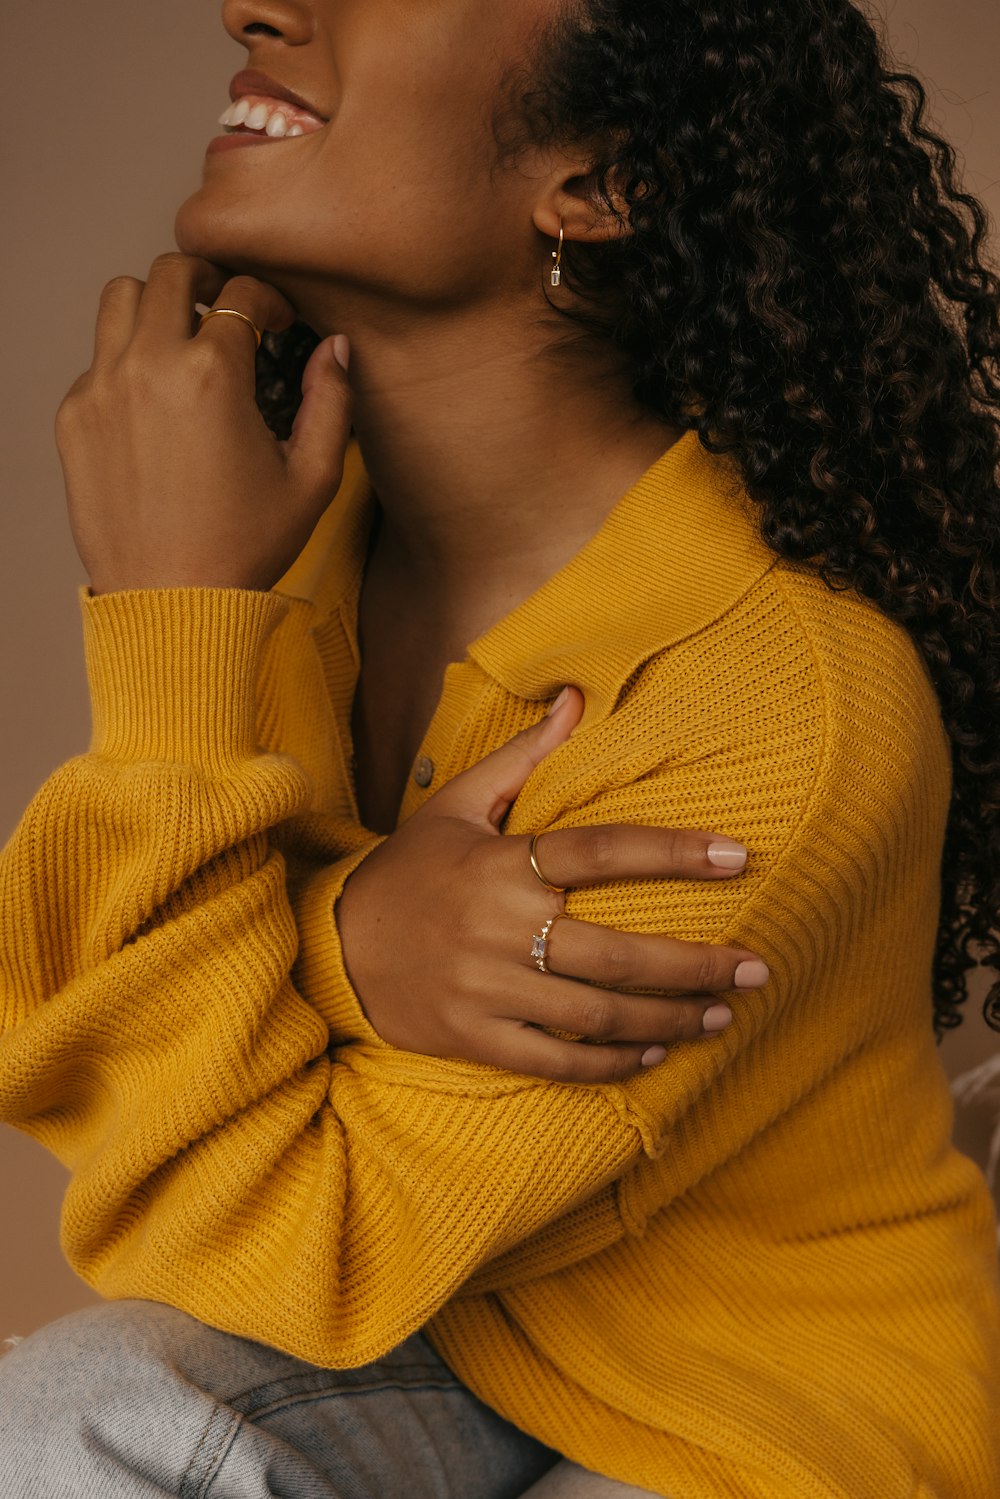 a woman with curly hair wearing a yellow sweater